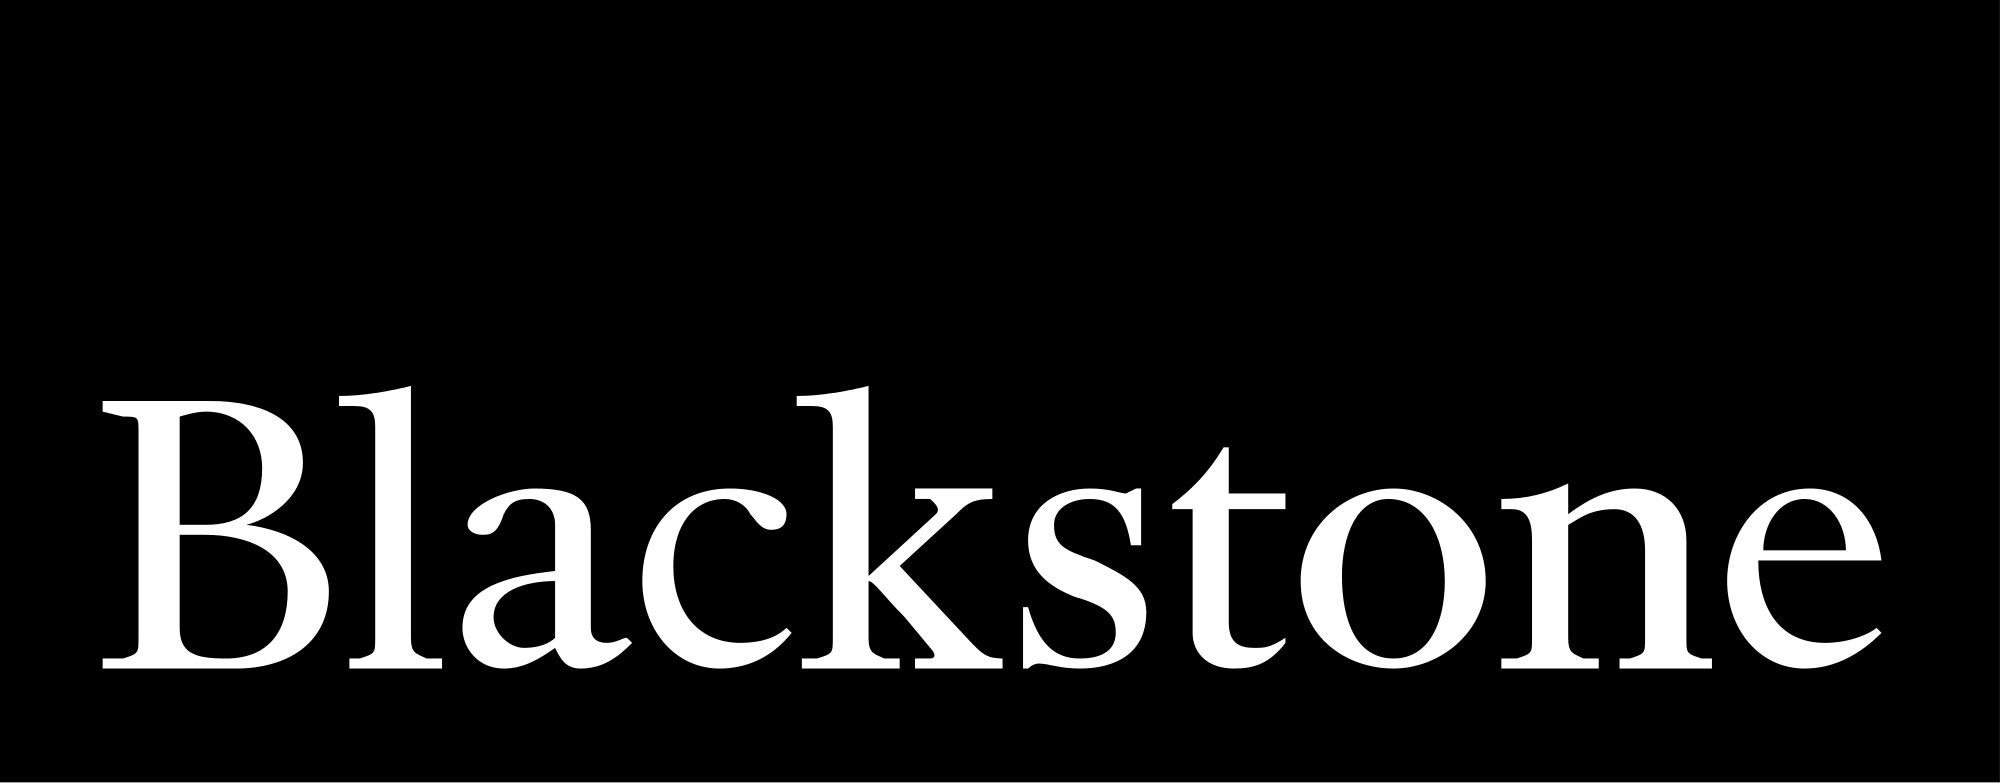 Blackstone is the Biggest Landlord in the World